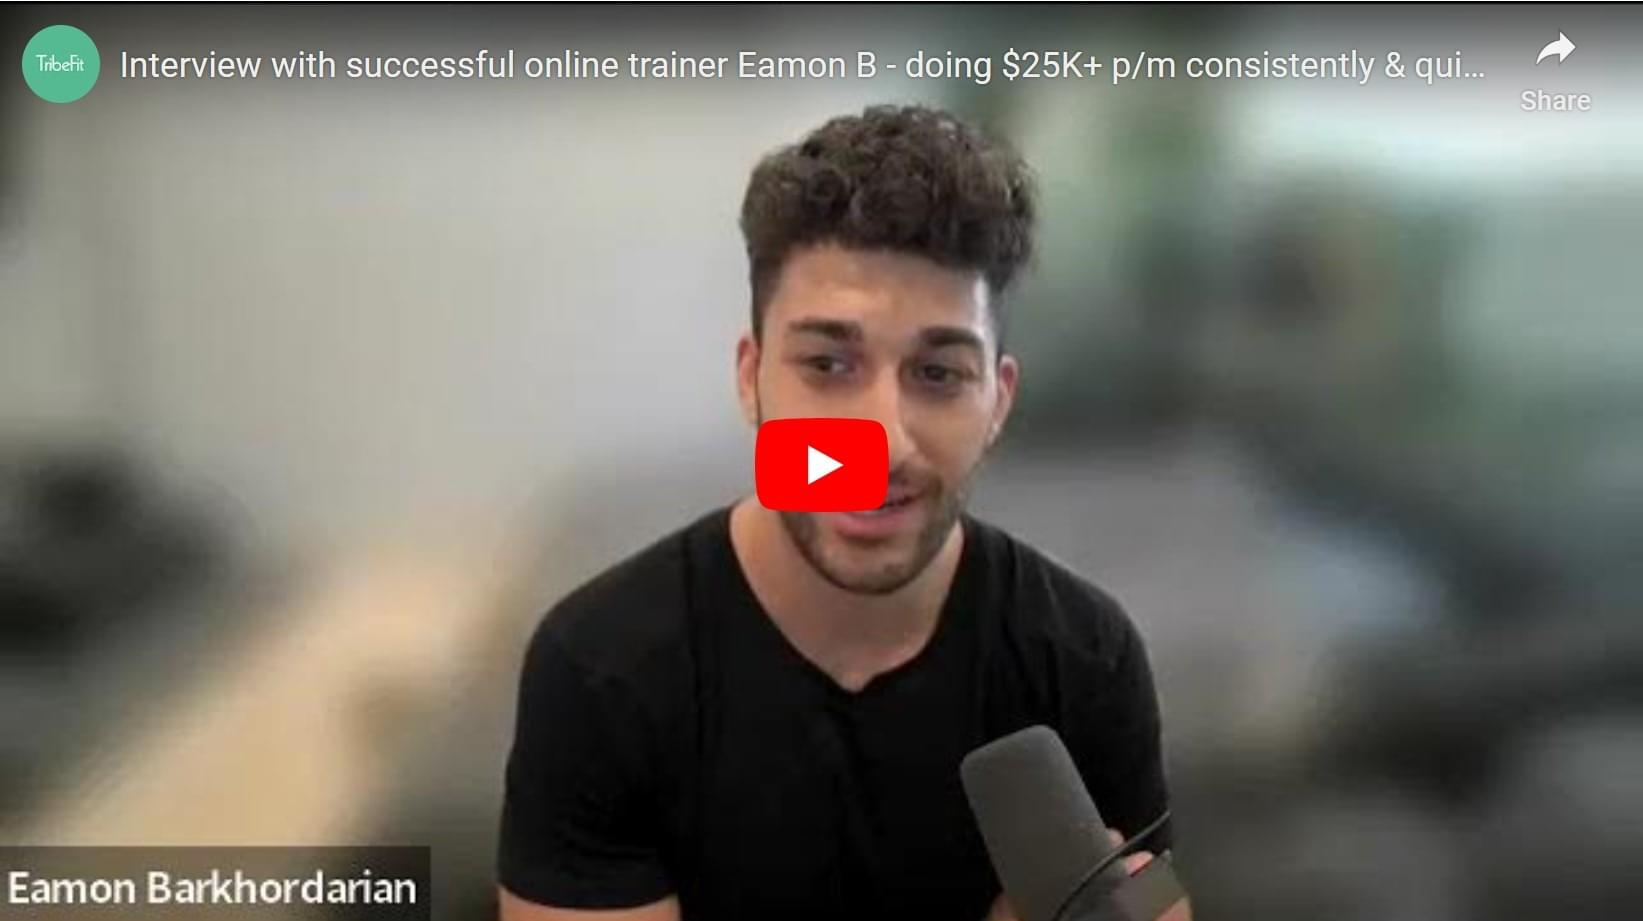 Interview with successful online trainer Eamon B - doing $25K+ p/m consistently